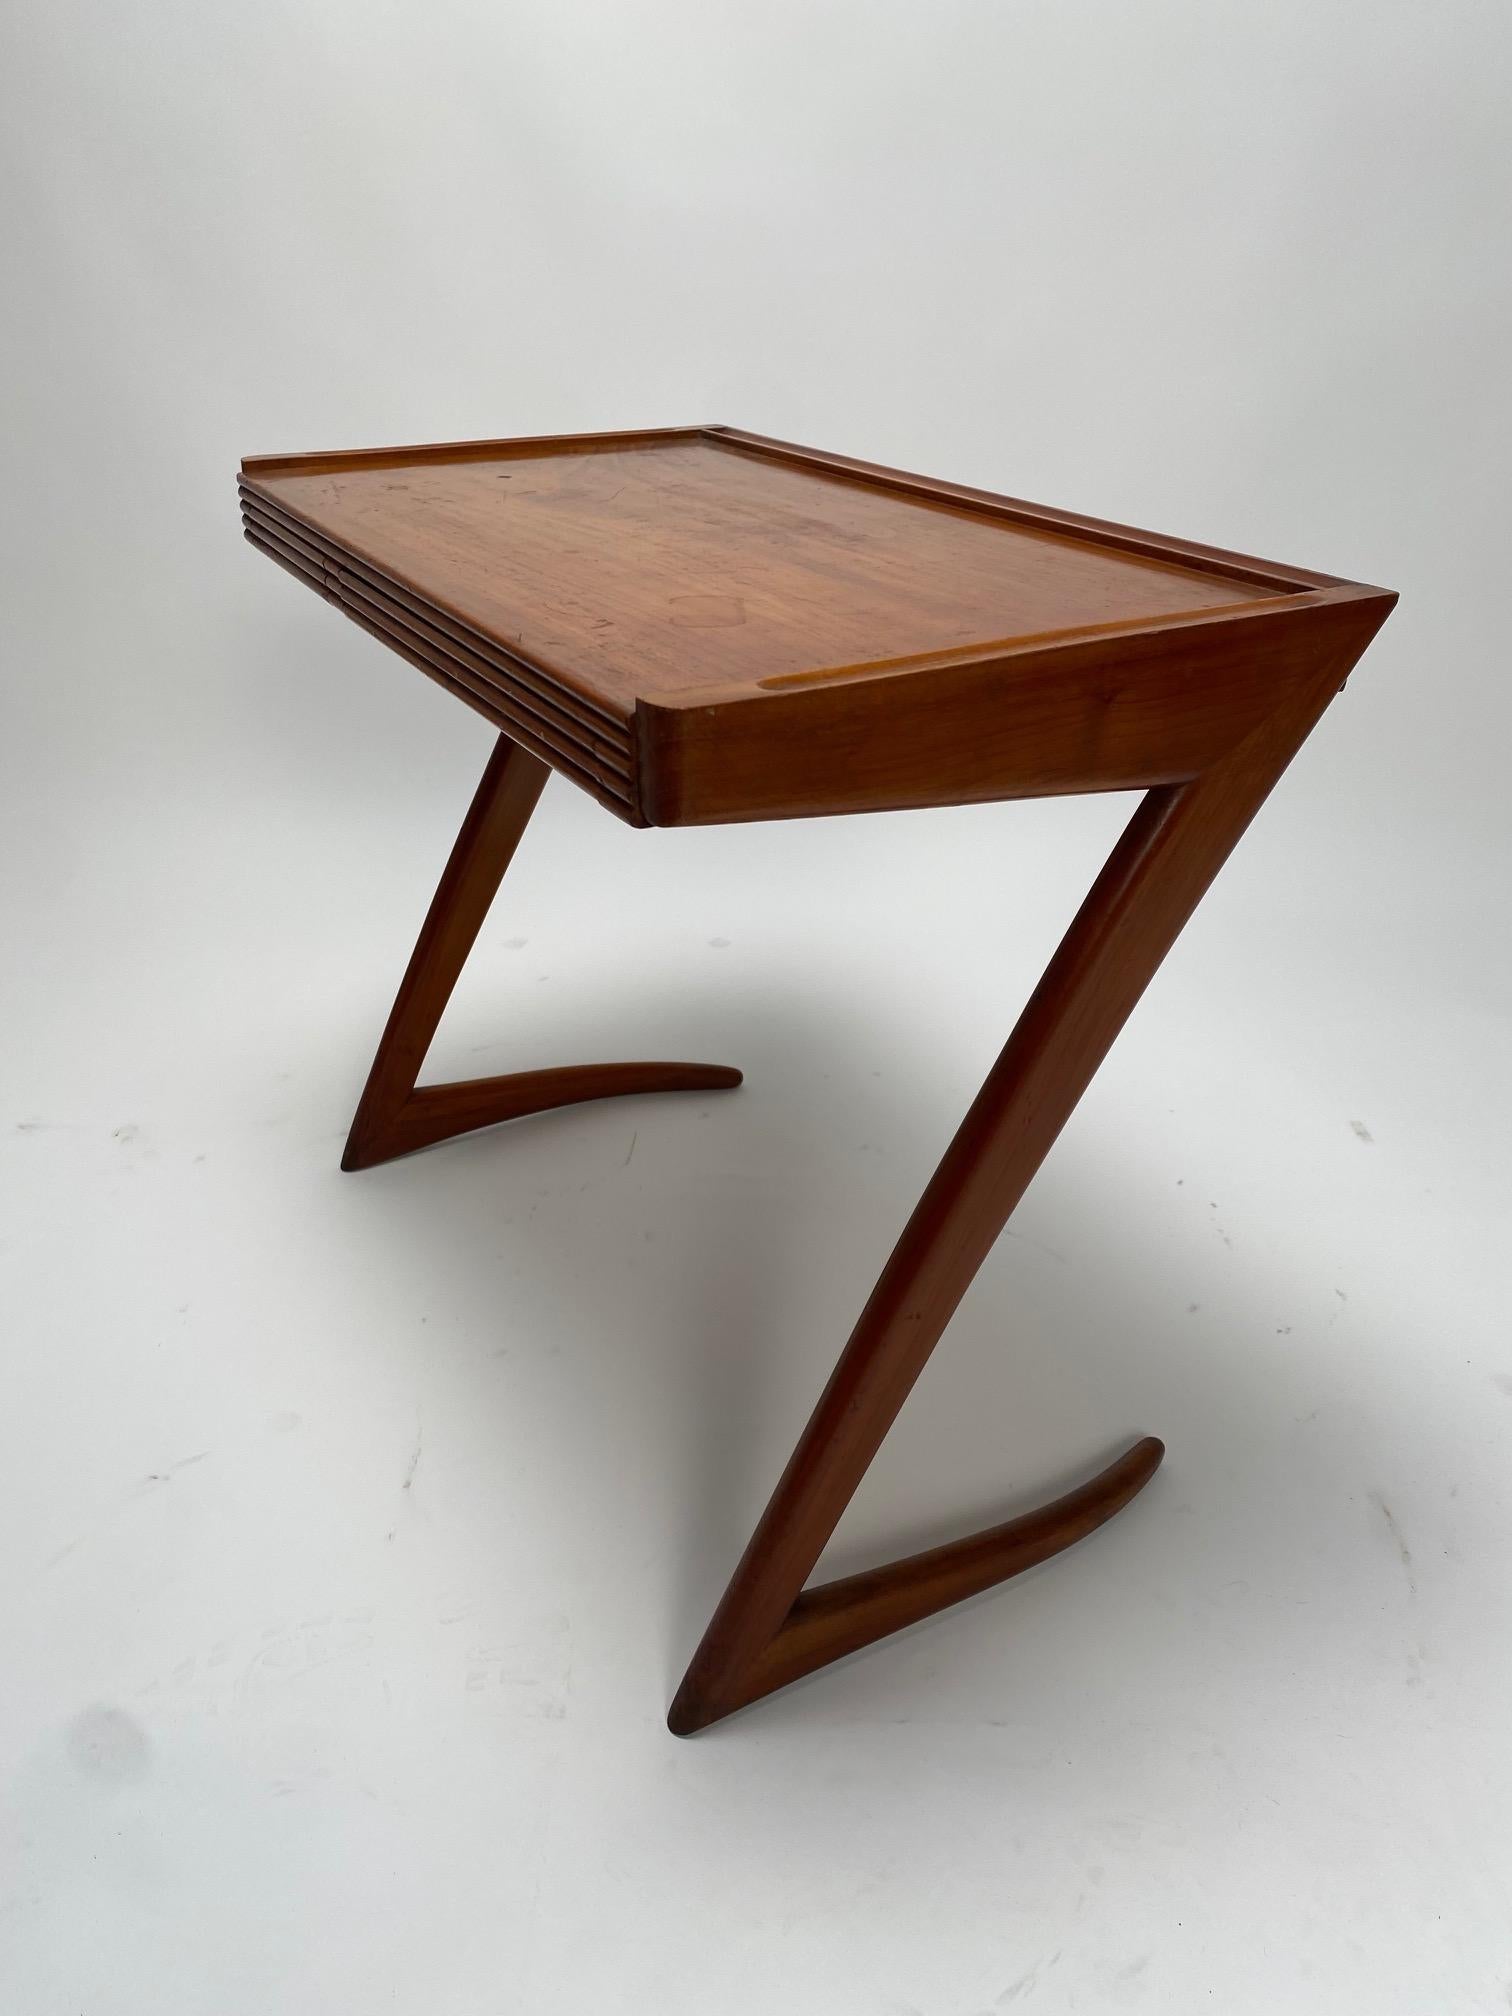 Giuseppe Scapinelli (Attr.), rare wooden table. Brazil, 1950

Among the great masters of Brazilian modern design, Giuseppe Scapinelli was born in 1891 in Modena, Italy, but like many of his Italian fellows, he crossed the ocean and immigrated to